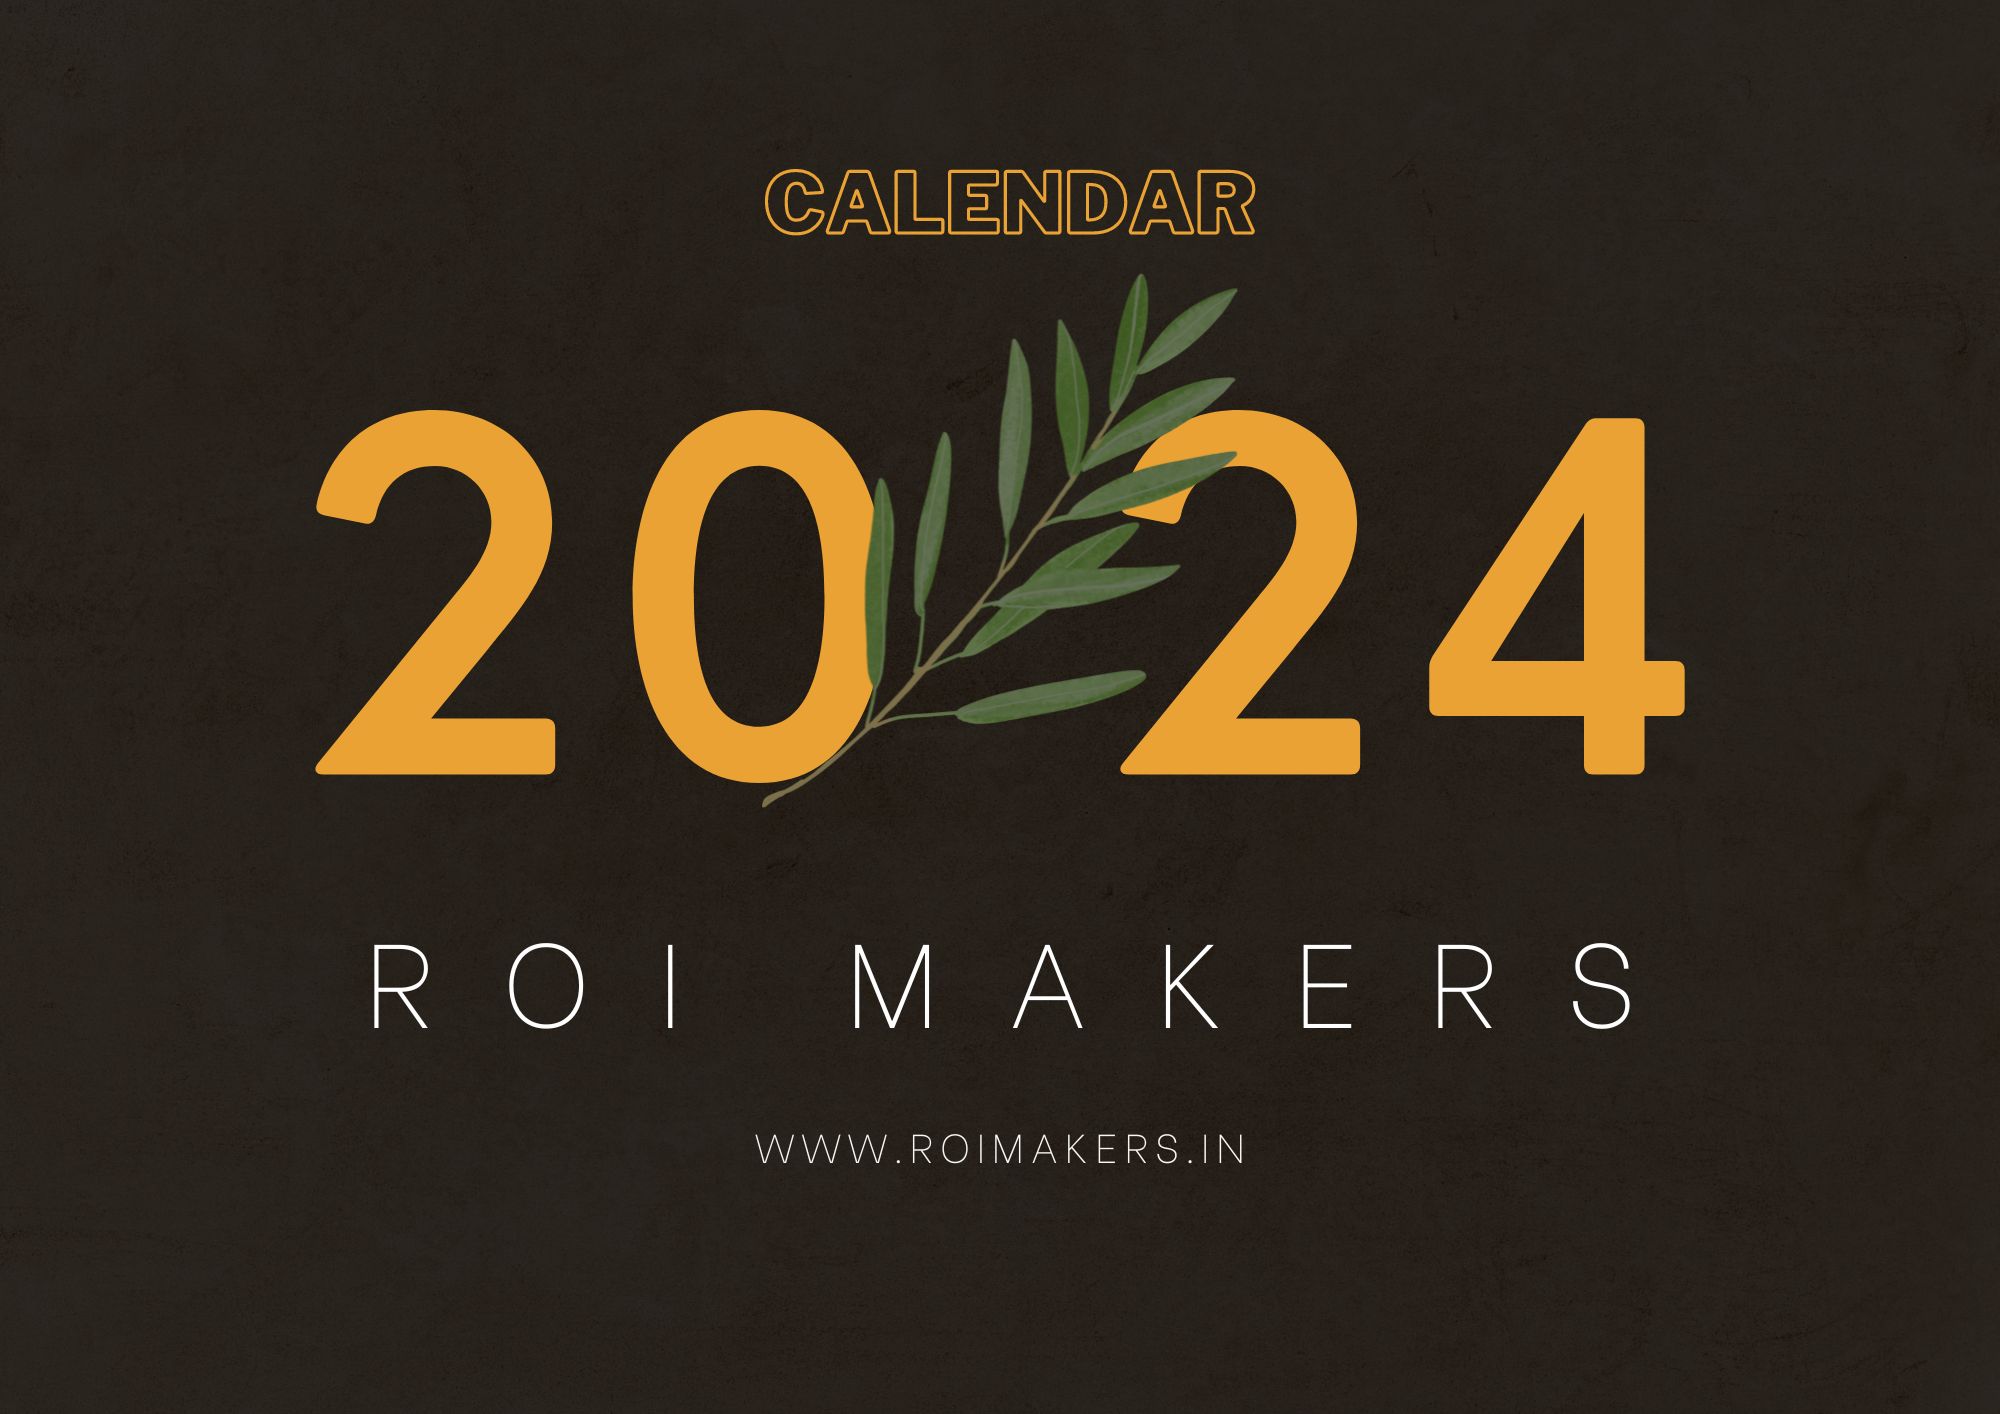 Introducing the ROI Makers 2024 Indian Calendar for Performance-driven Strategies